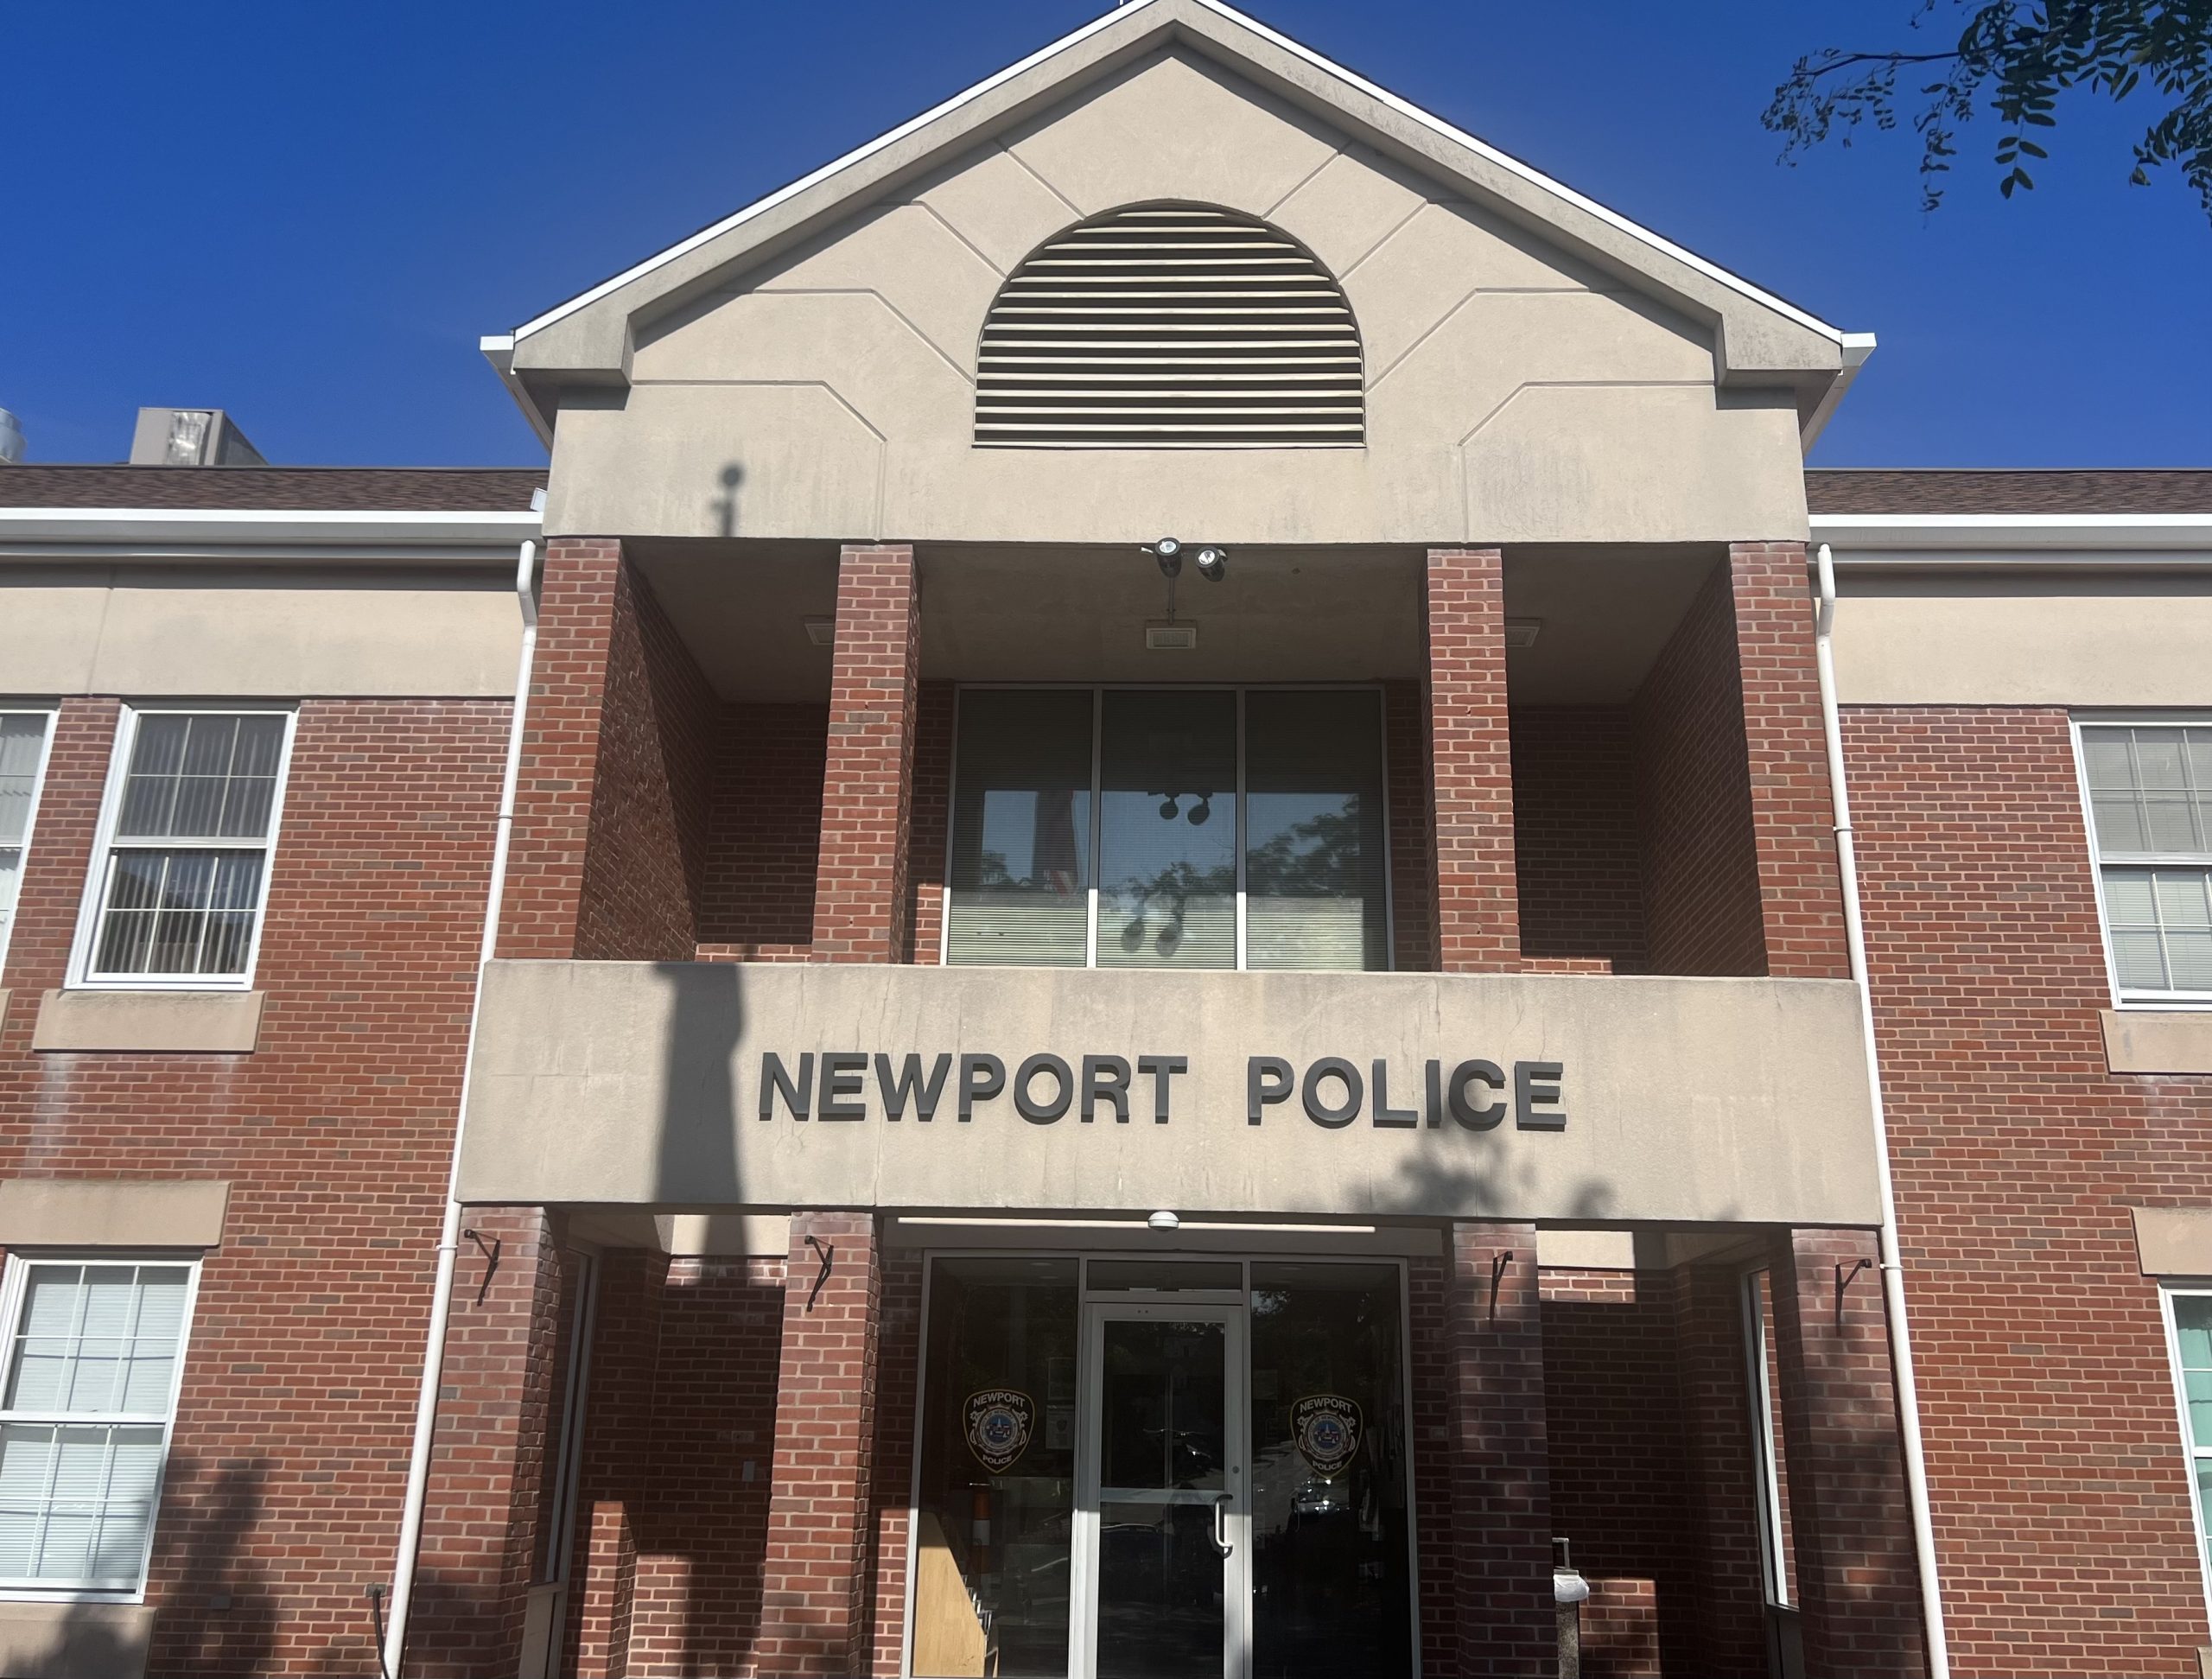  Newport Police arrest 21, issue 74 citations over St. Patrick’s Day Weekend 